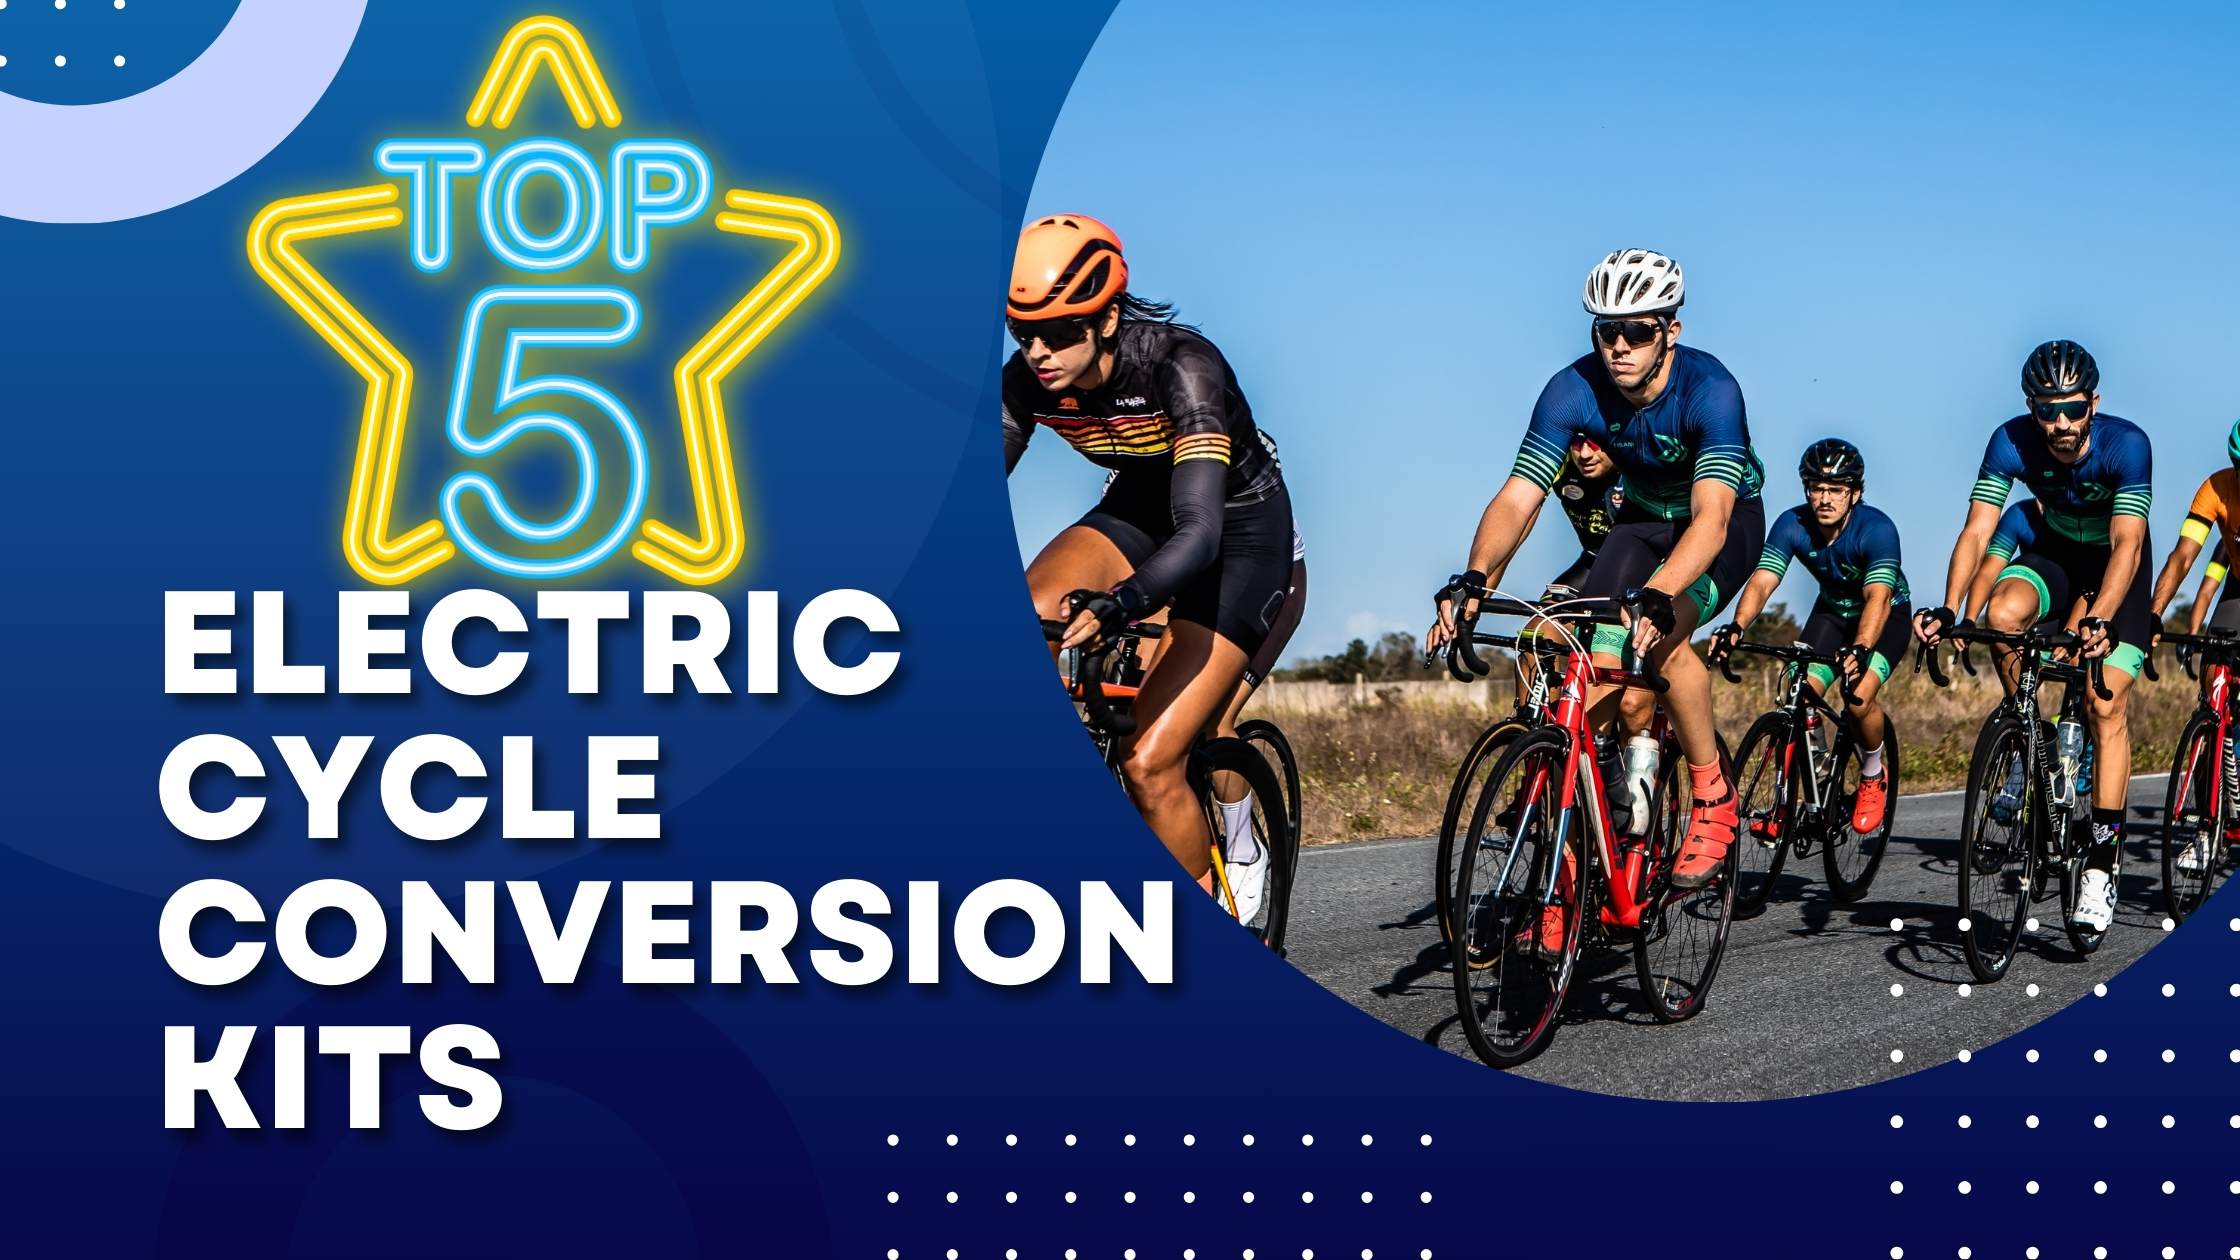 Which is the best electric cycle conversion kit